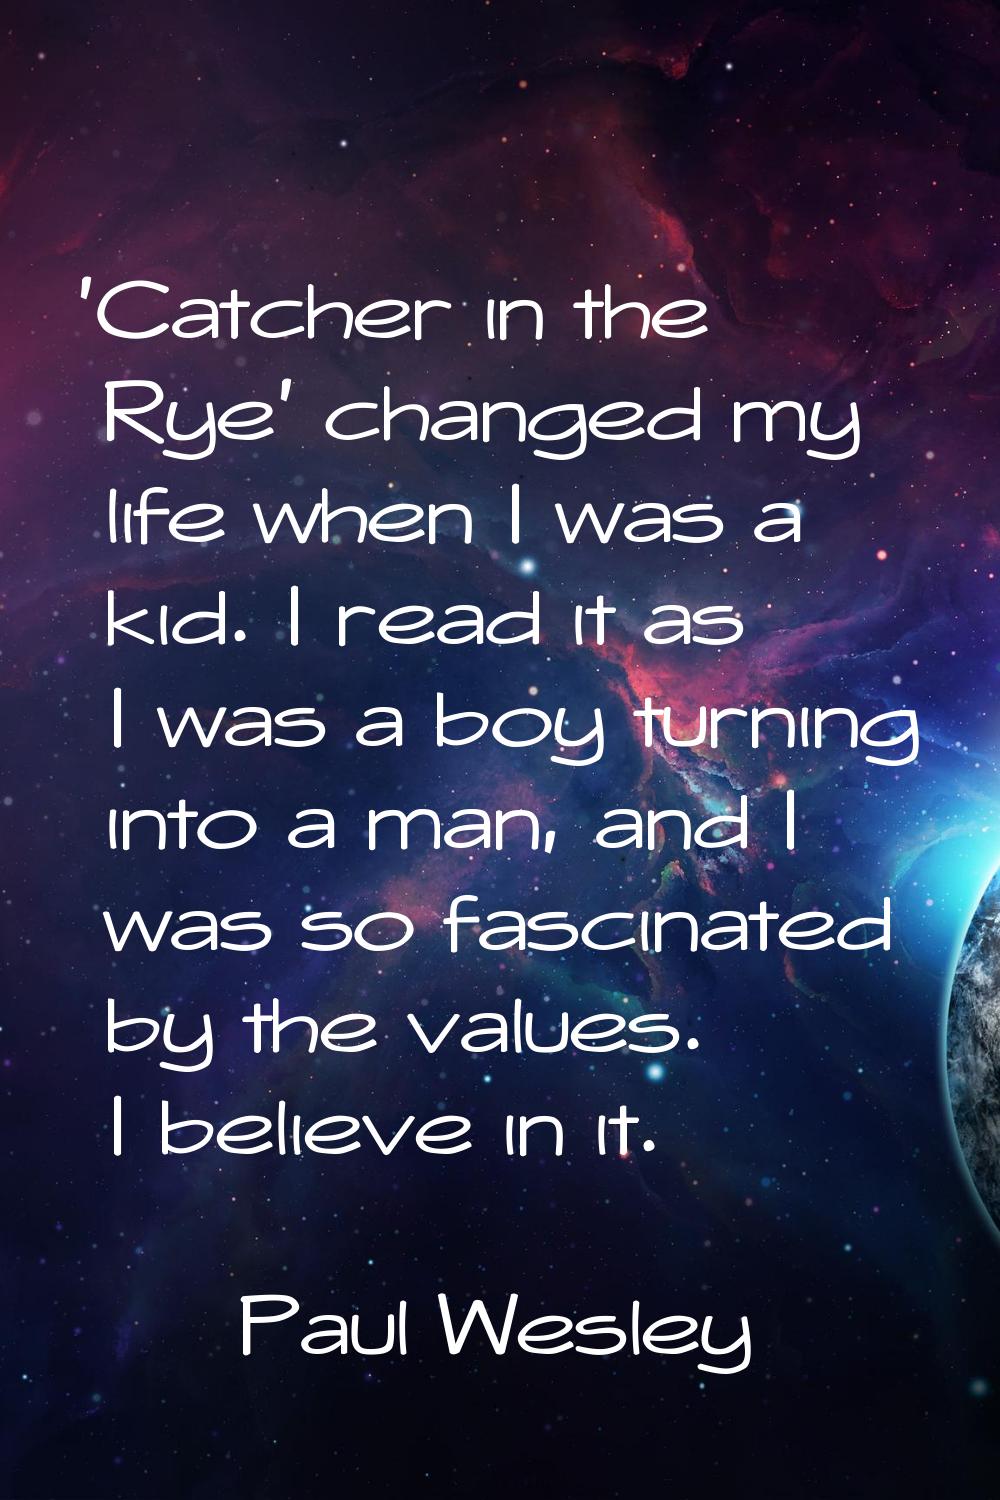 'Catcher in the Rye' changed my life when I was a kid. I read it as I was a boy turning into a man,